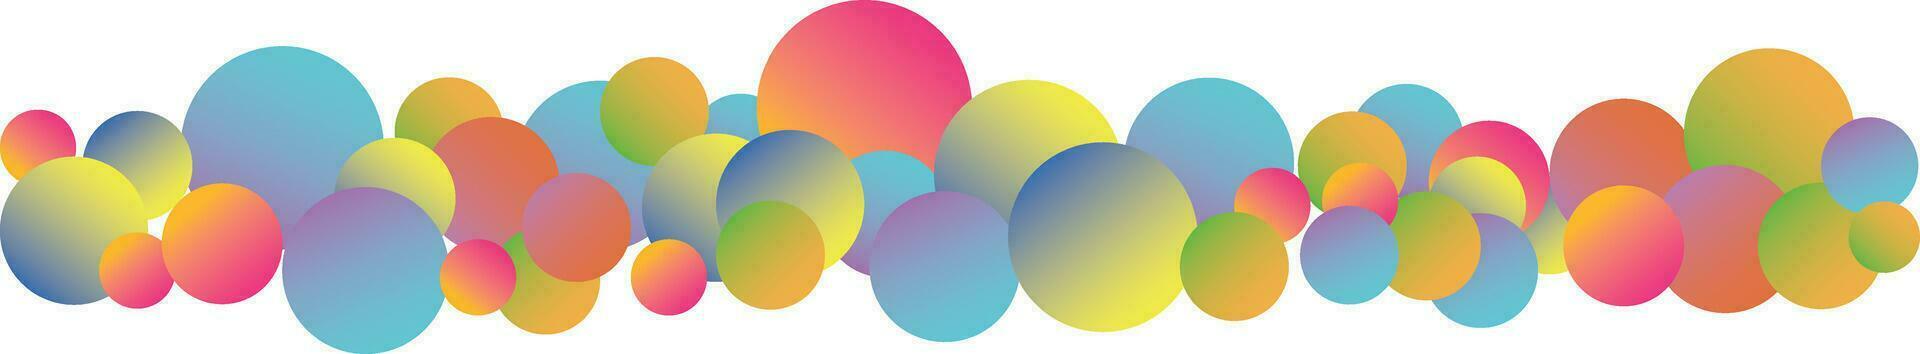 Colorful rainbow matte balls in different sizes. Abstract composition with multicolored flying spheres. vector